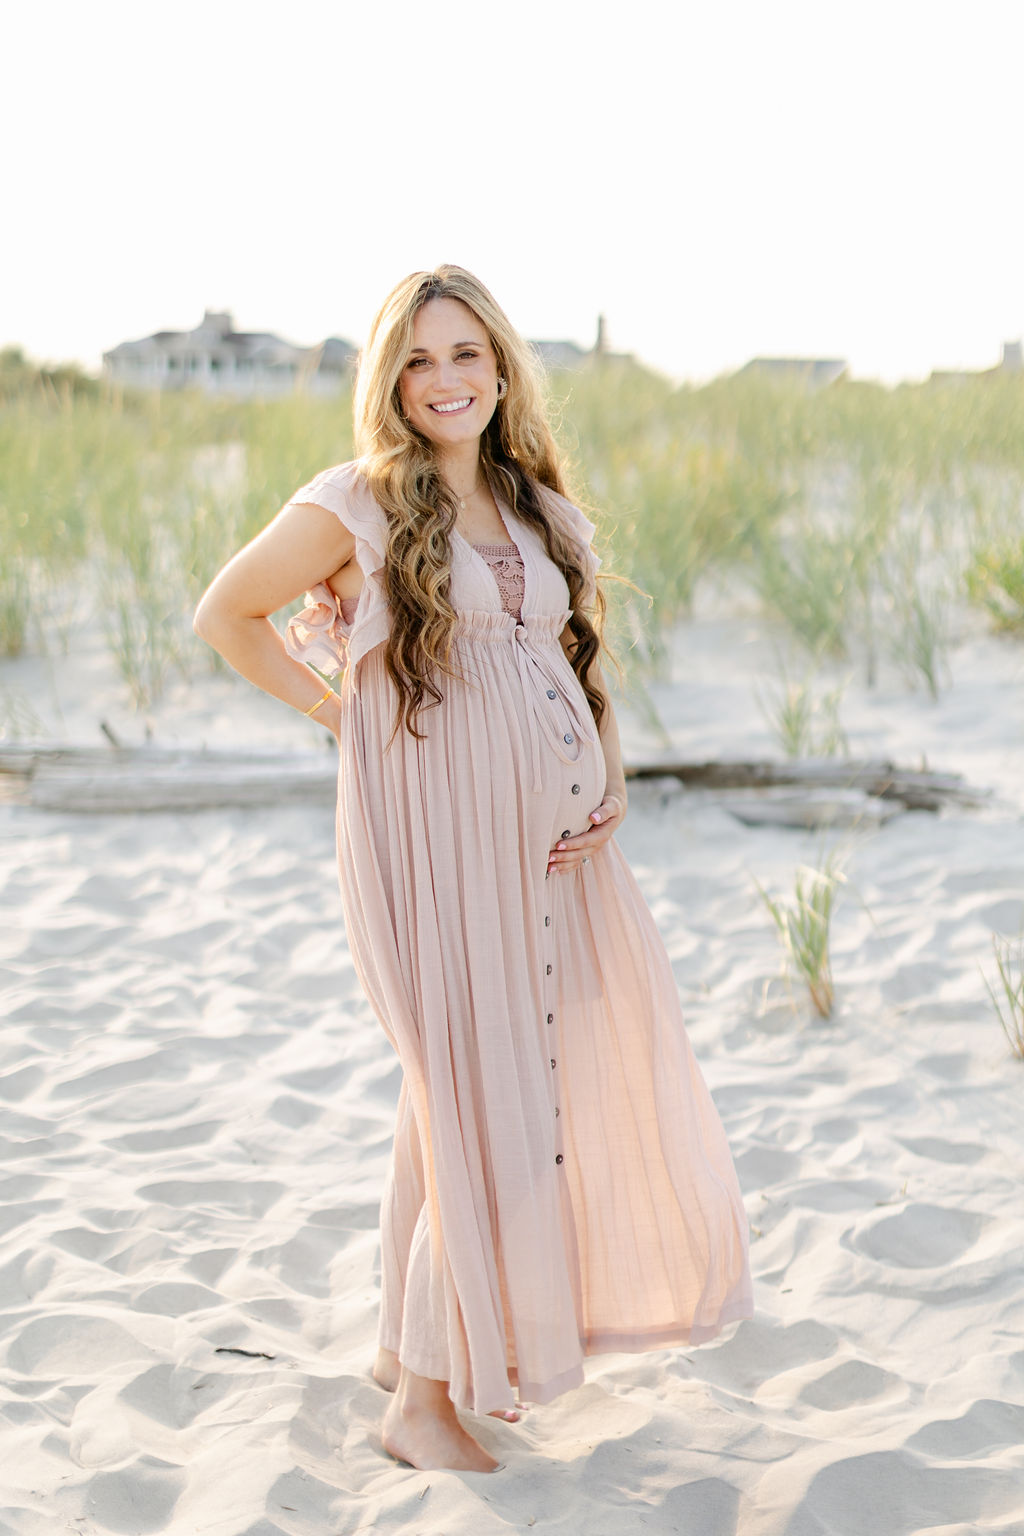 A mother to be in a pink maternity dress stands on a beach at sunset holding her bump after visiting a birth center charleston sc